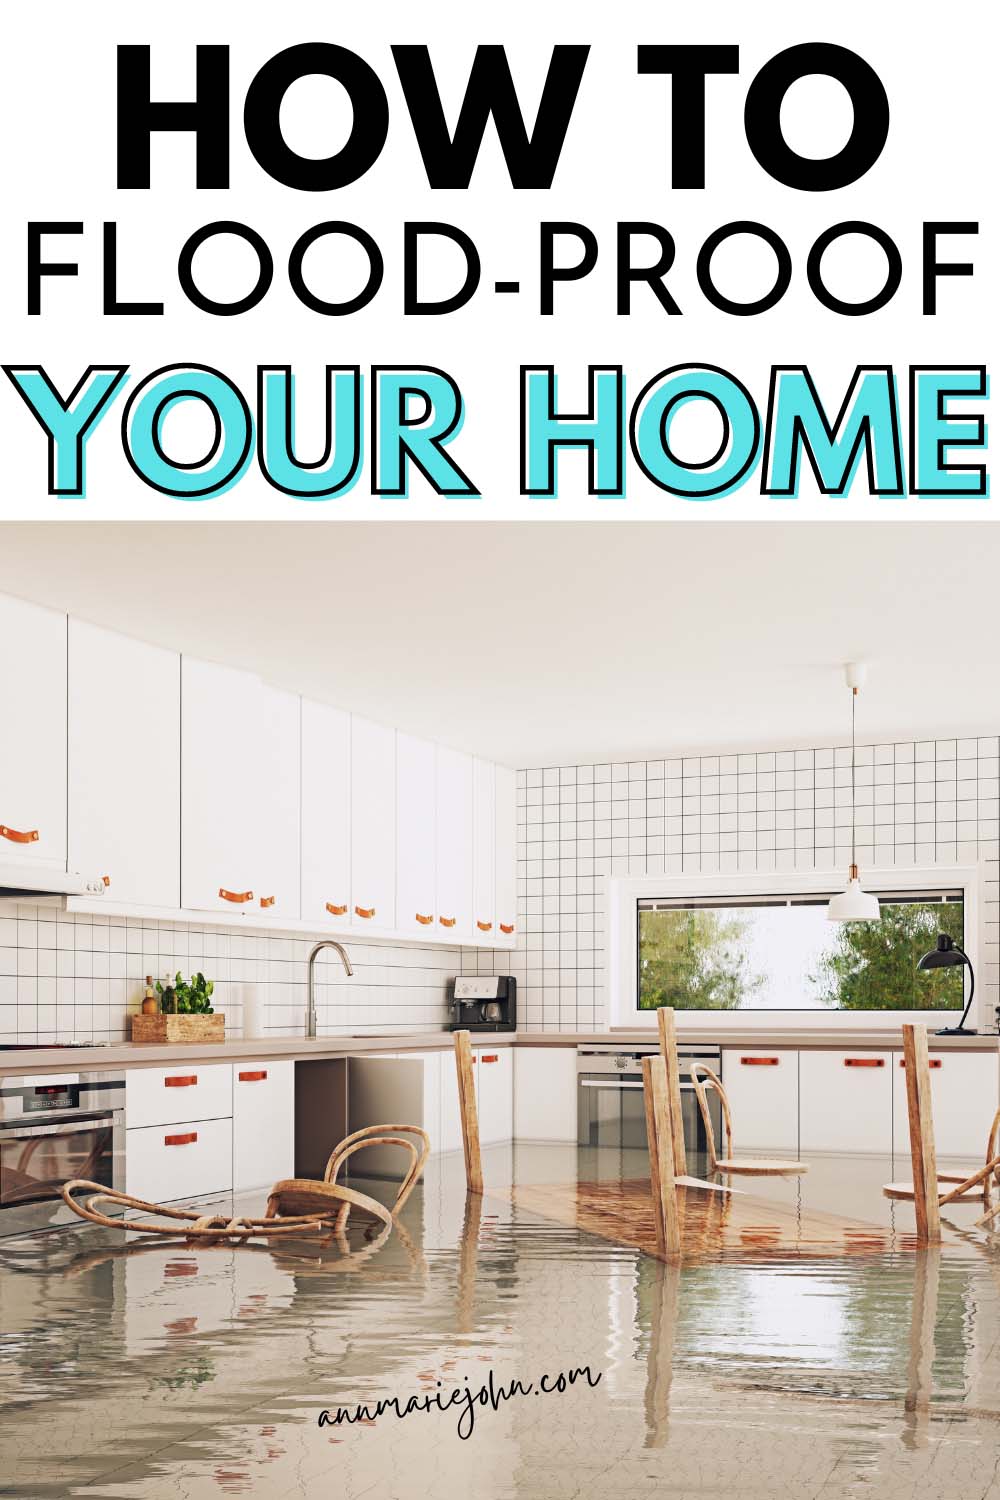 How To Flood-Proof Your Home